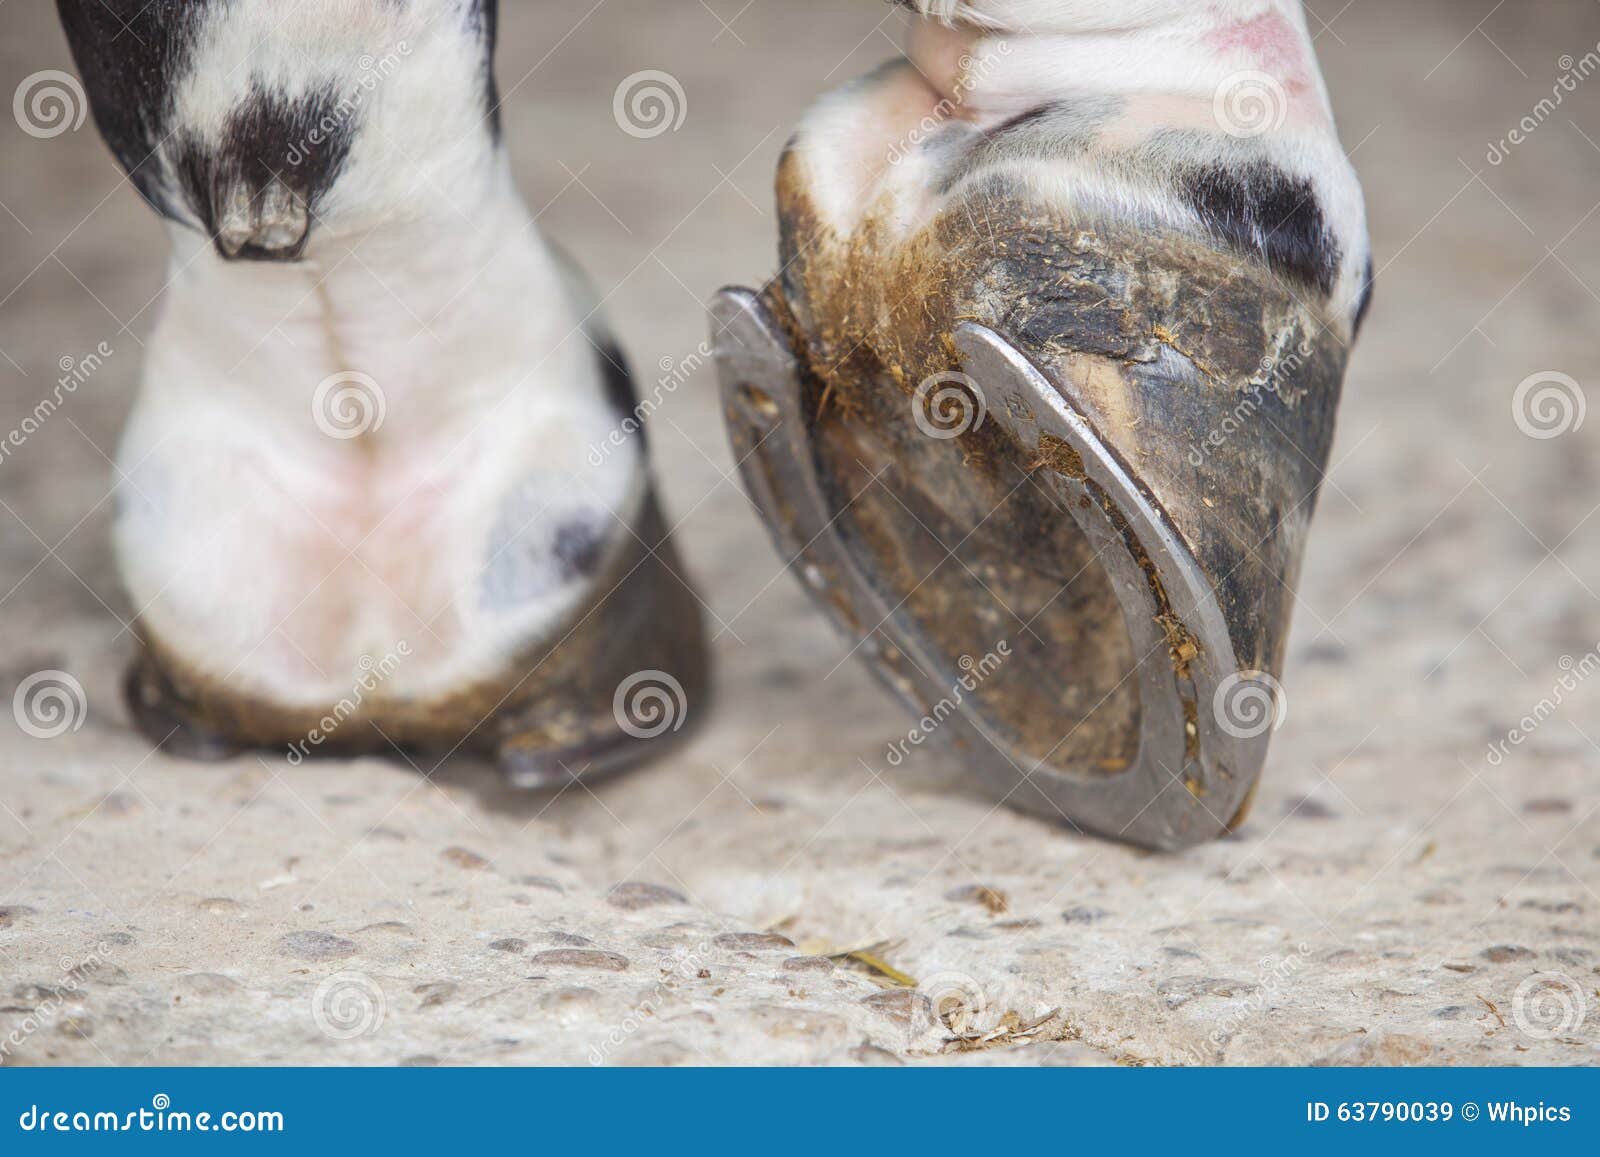 view of horse foot hoof outside stables